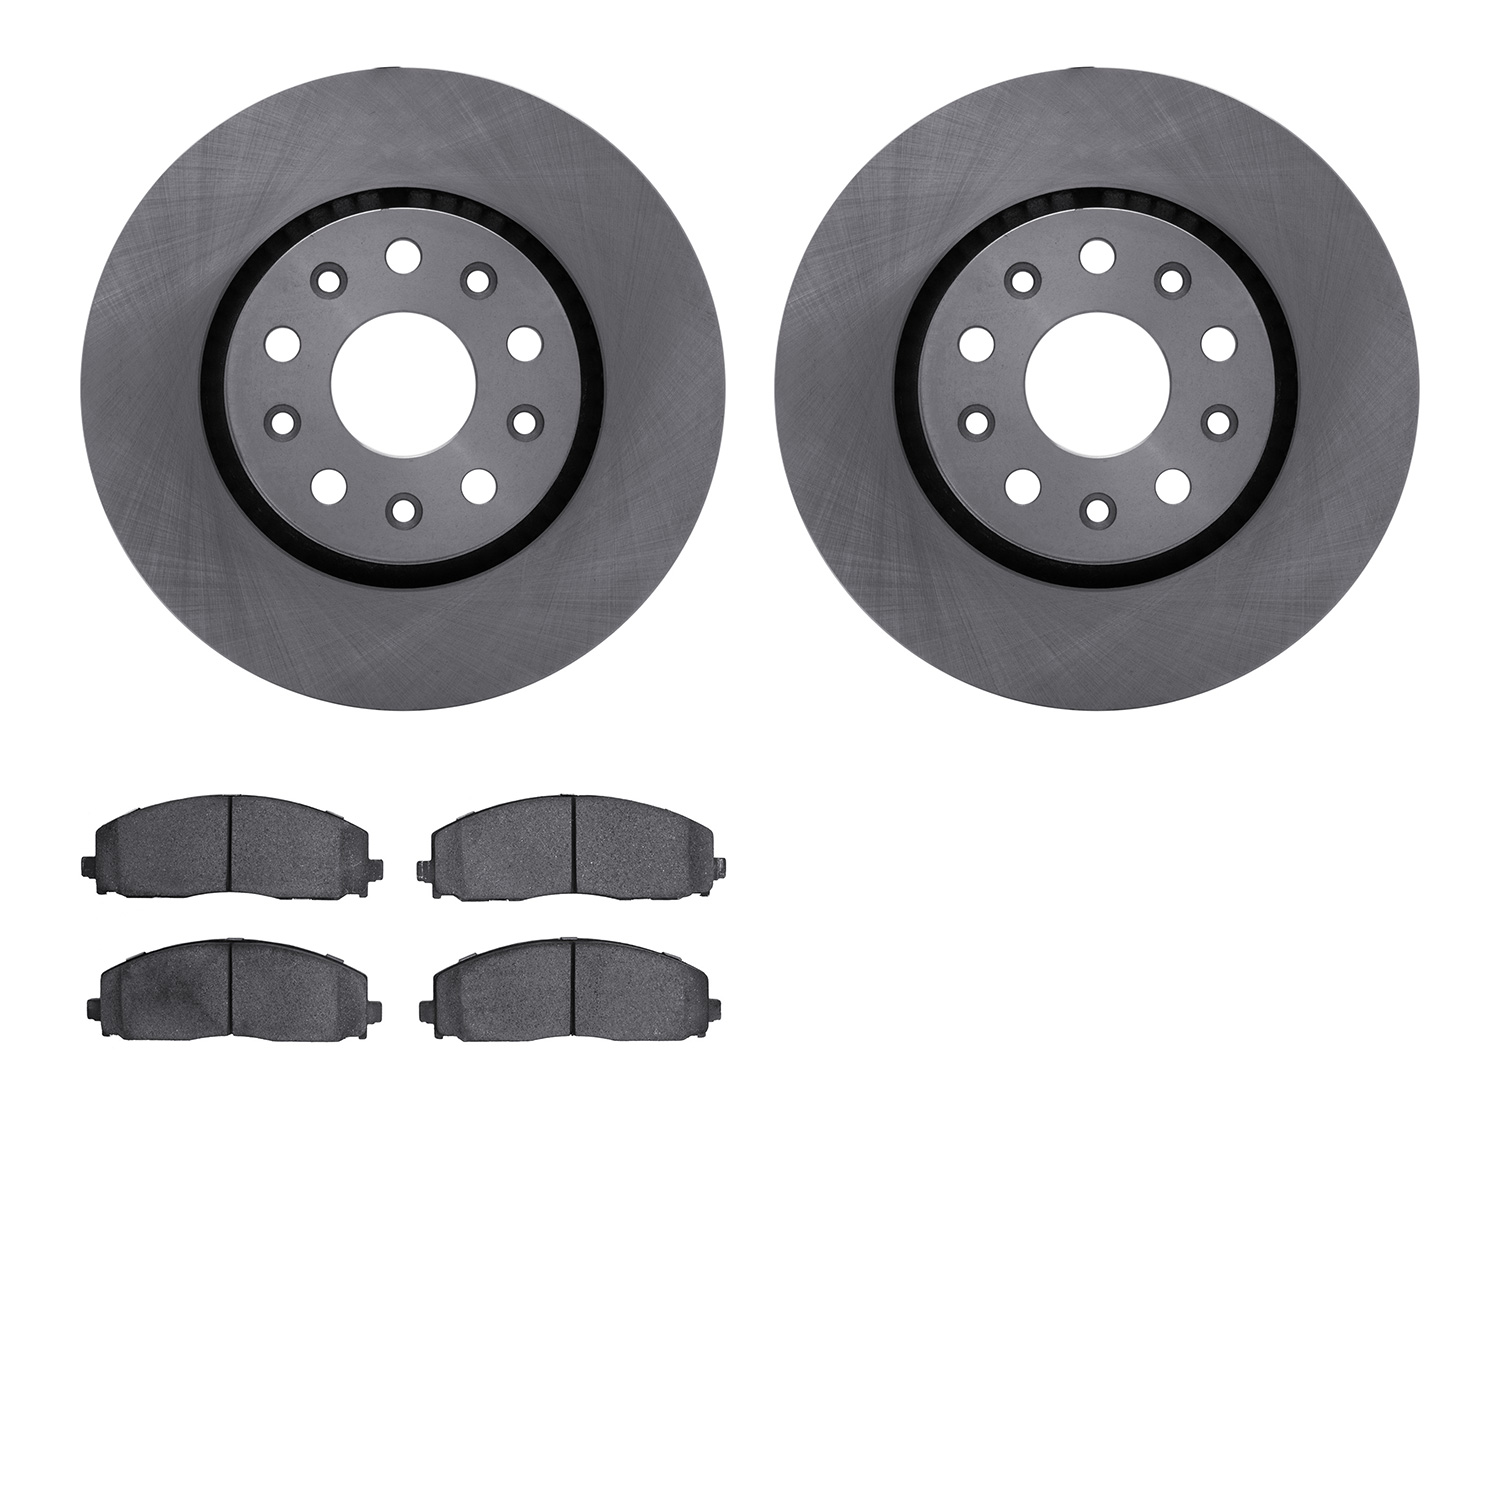 Brake Rotors with Ultimate-Duty Brake Pads, Fits Select